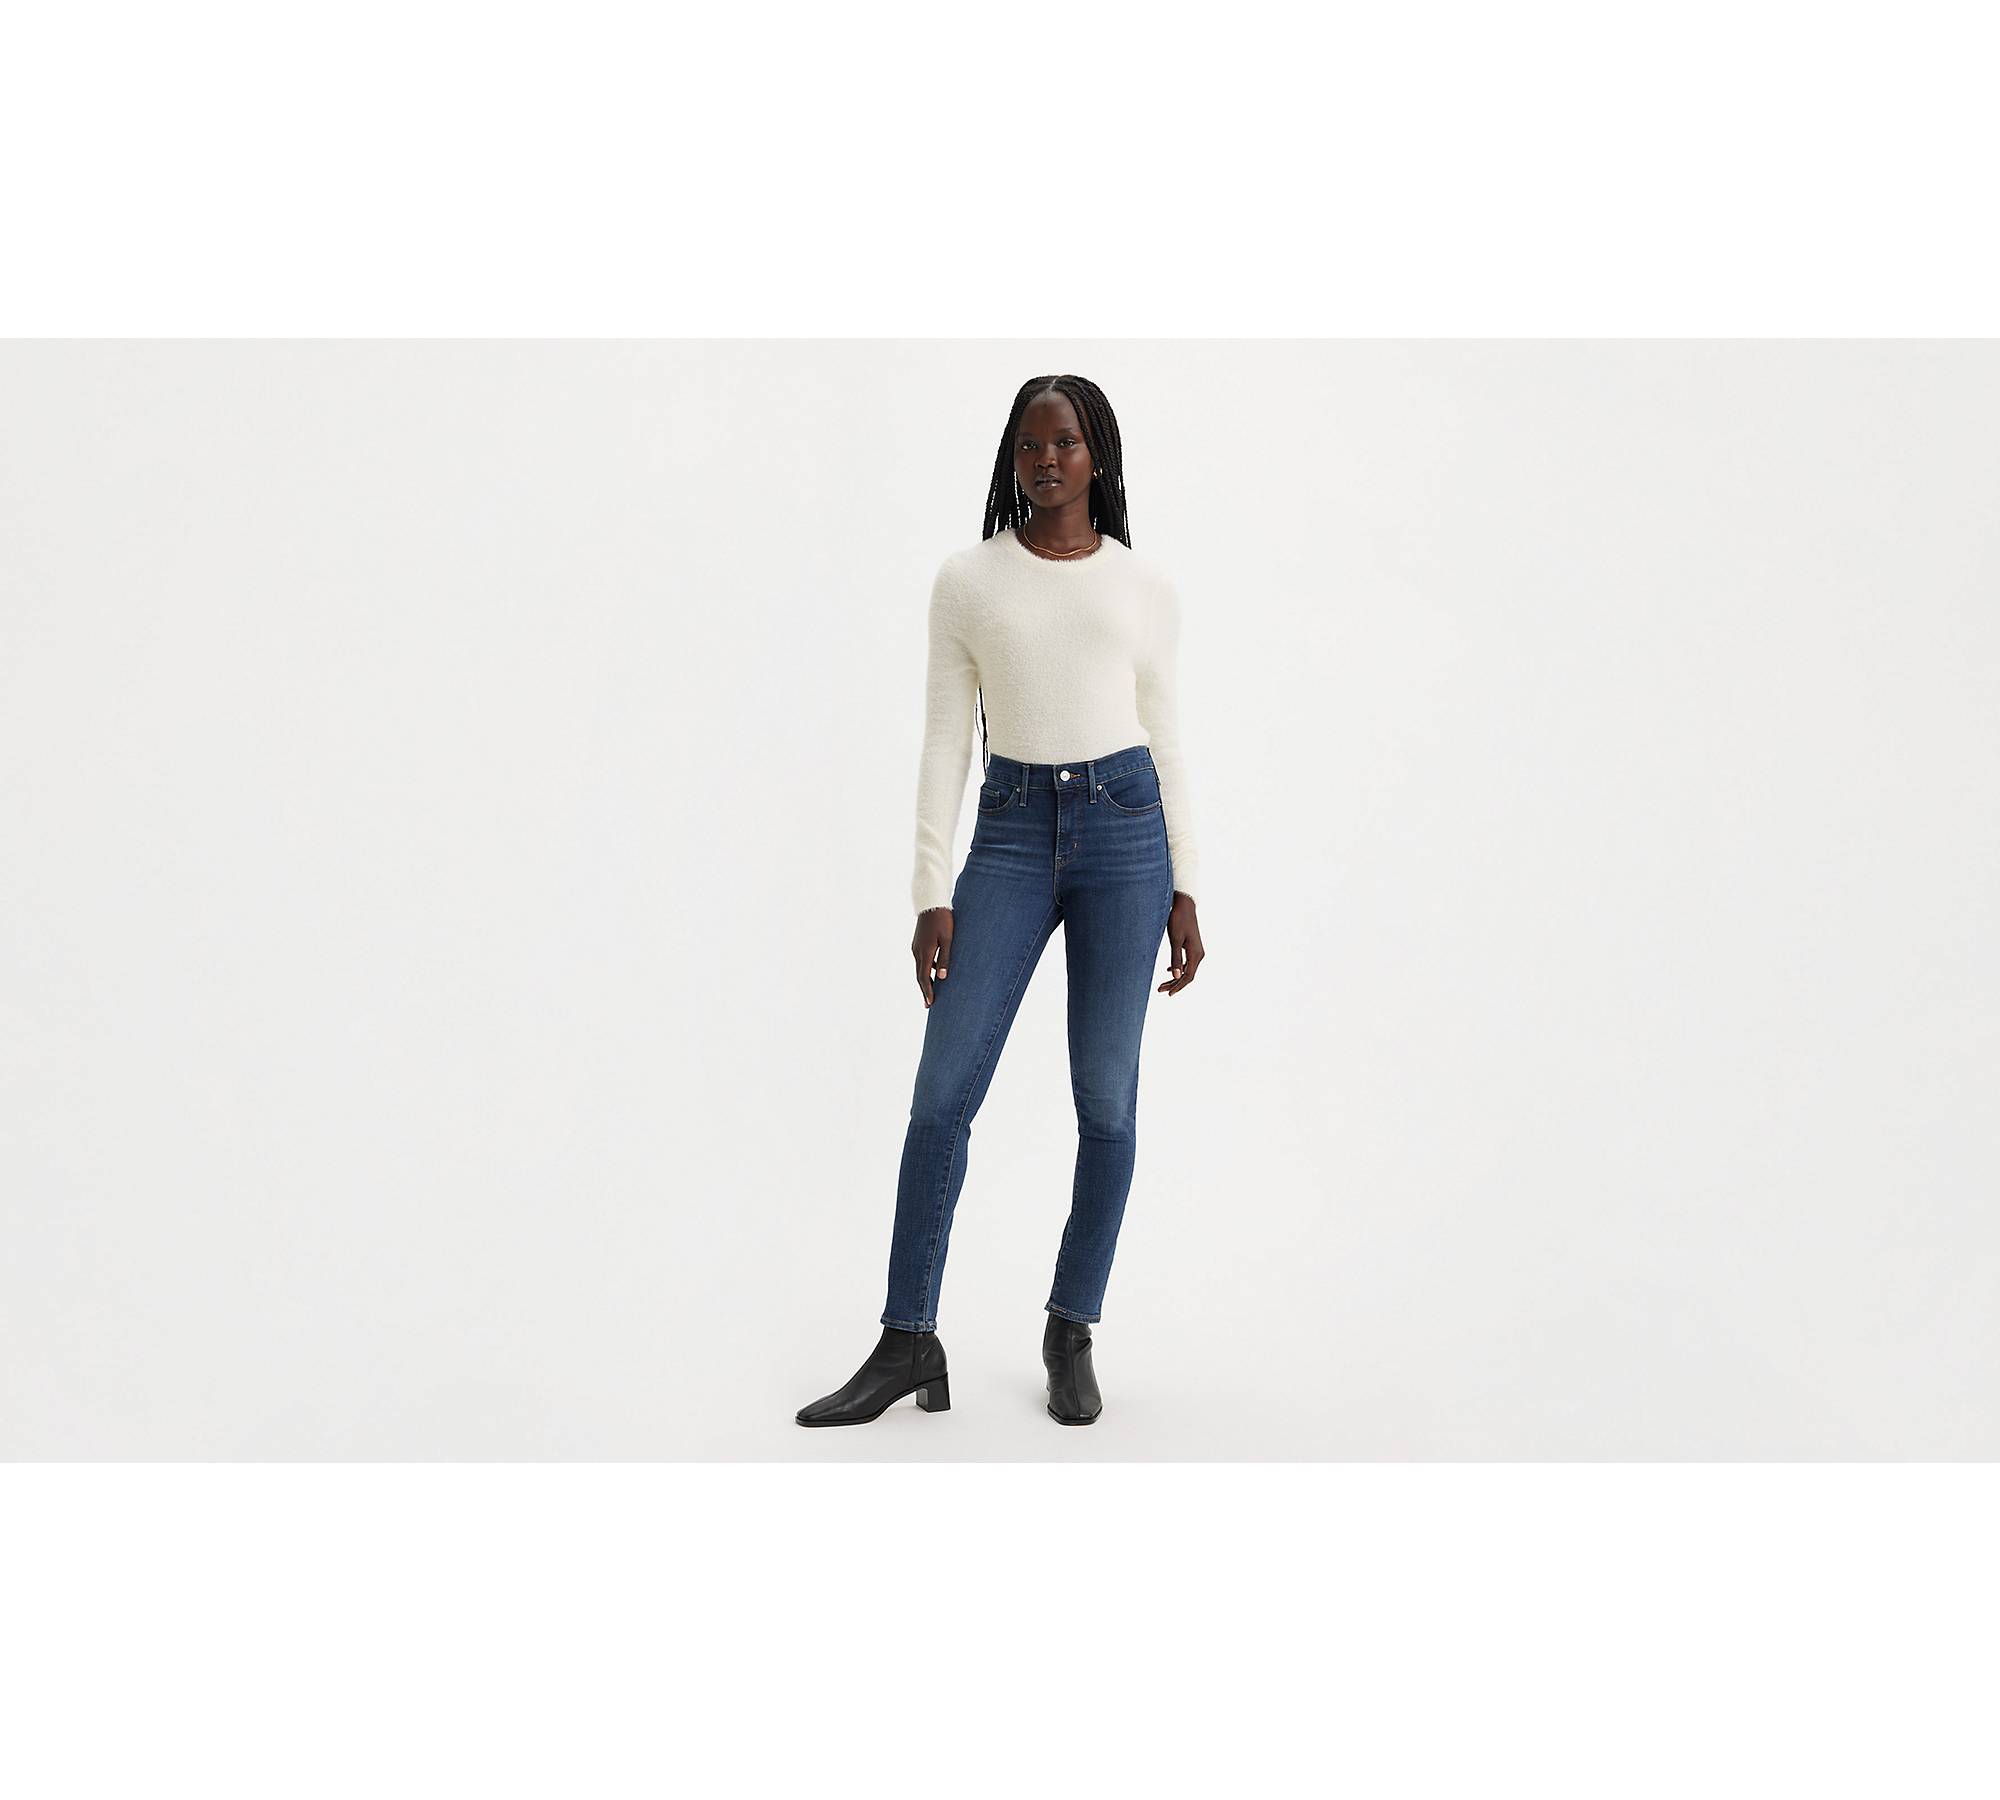 Levi's Women's 311 Exposed Button Shaping Skinny J – Choose SZ/color – ASA  College: Florida